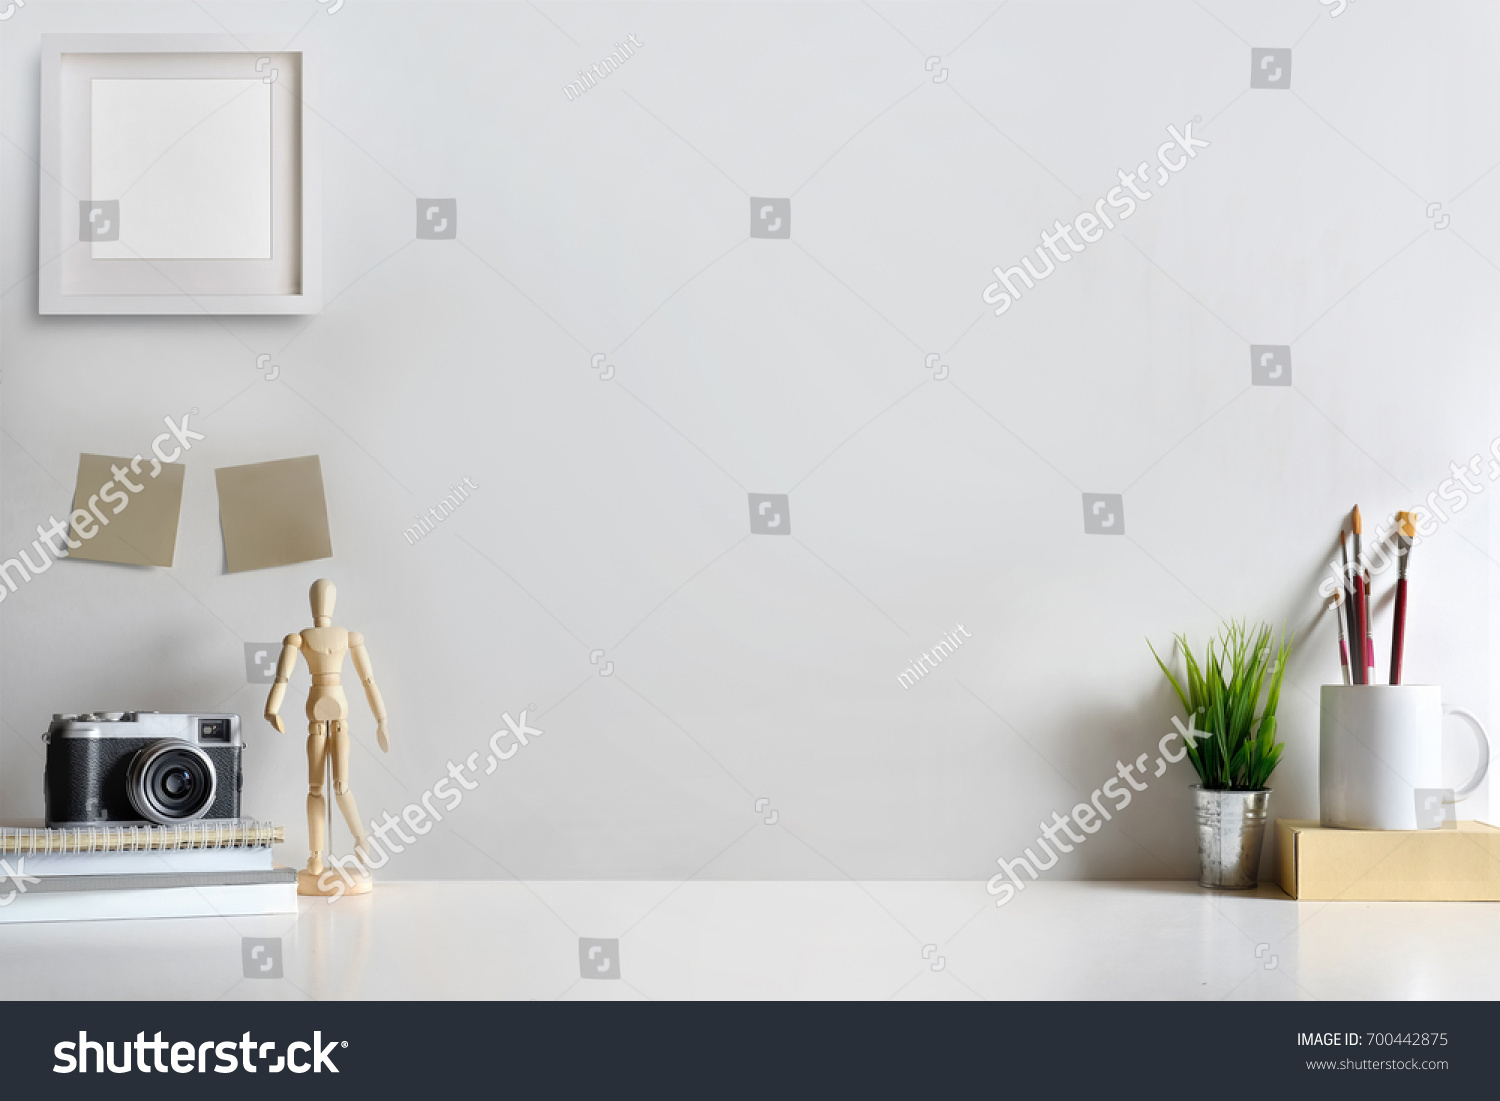 737,340 Living room table Images, Stock Photos & Vectors | Shutterstock